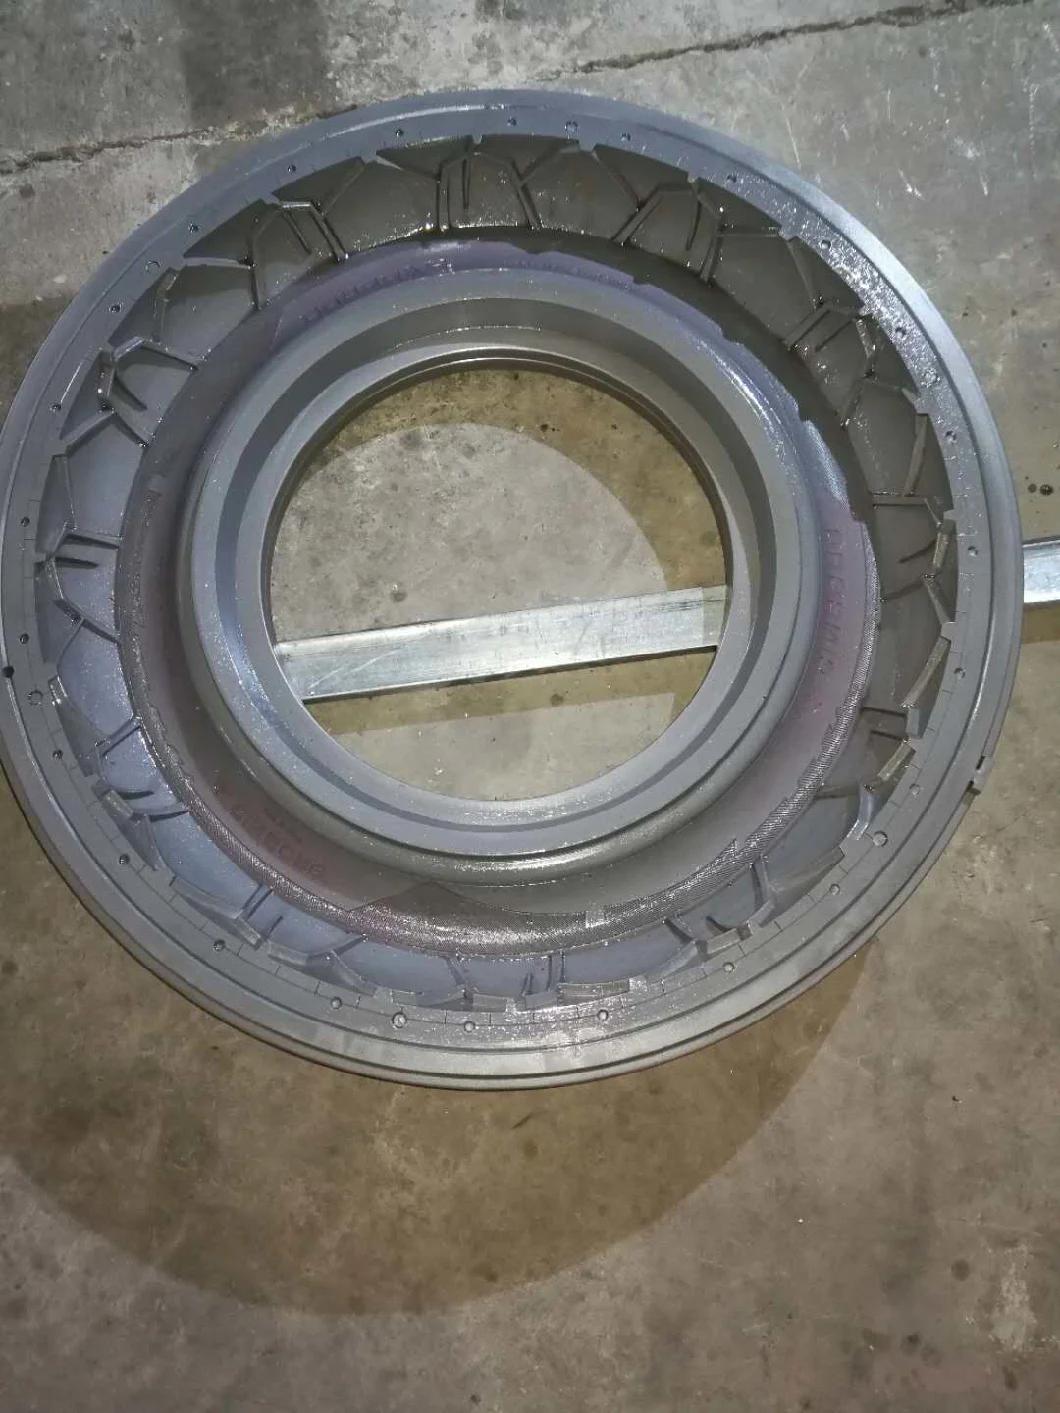 High Quality EDM Rubber Tyre Mould for Electric-Bike